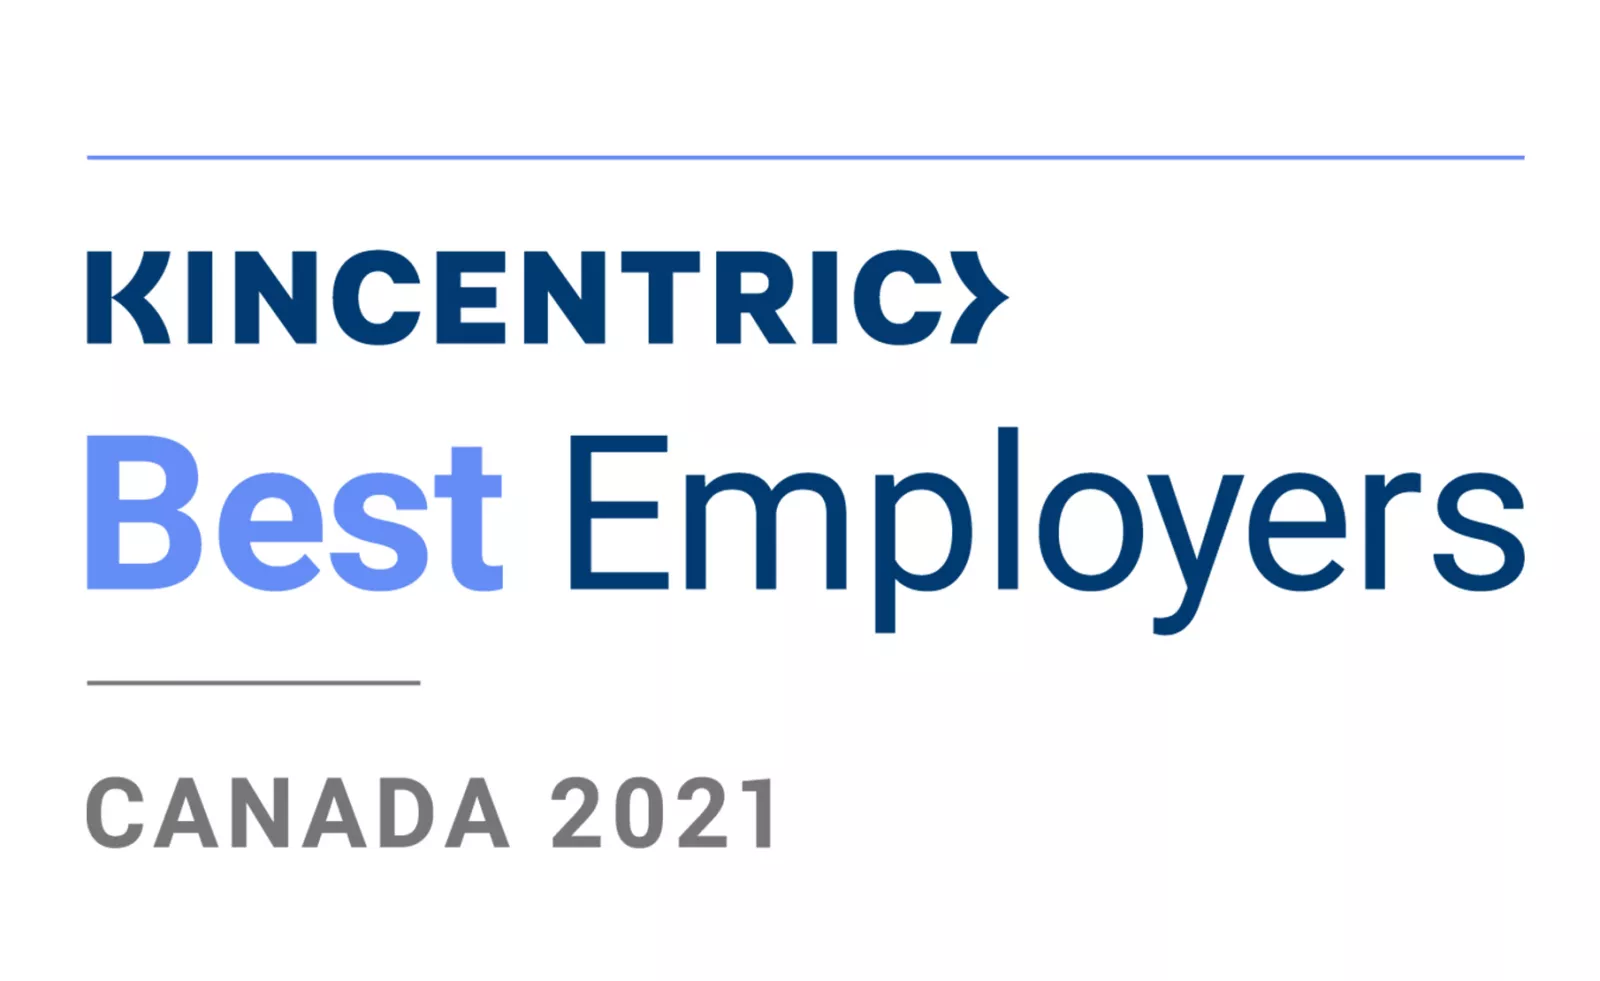  Kincentric Best Employers Canada 2021
